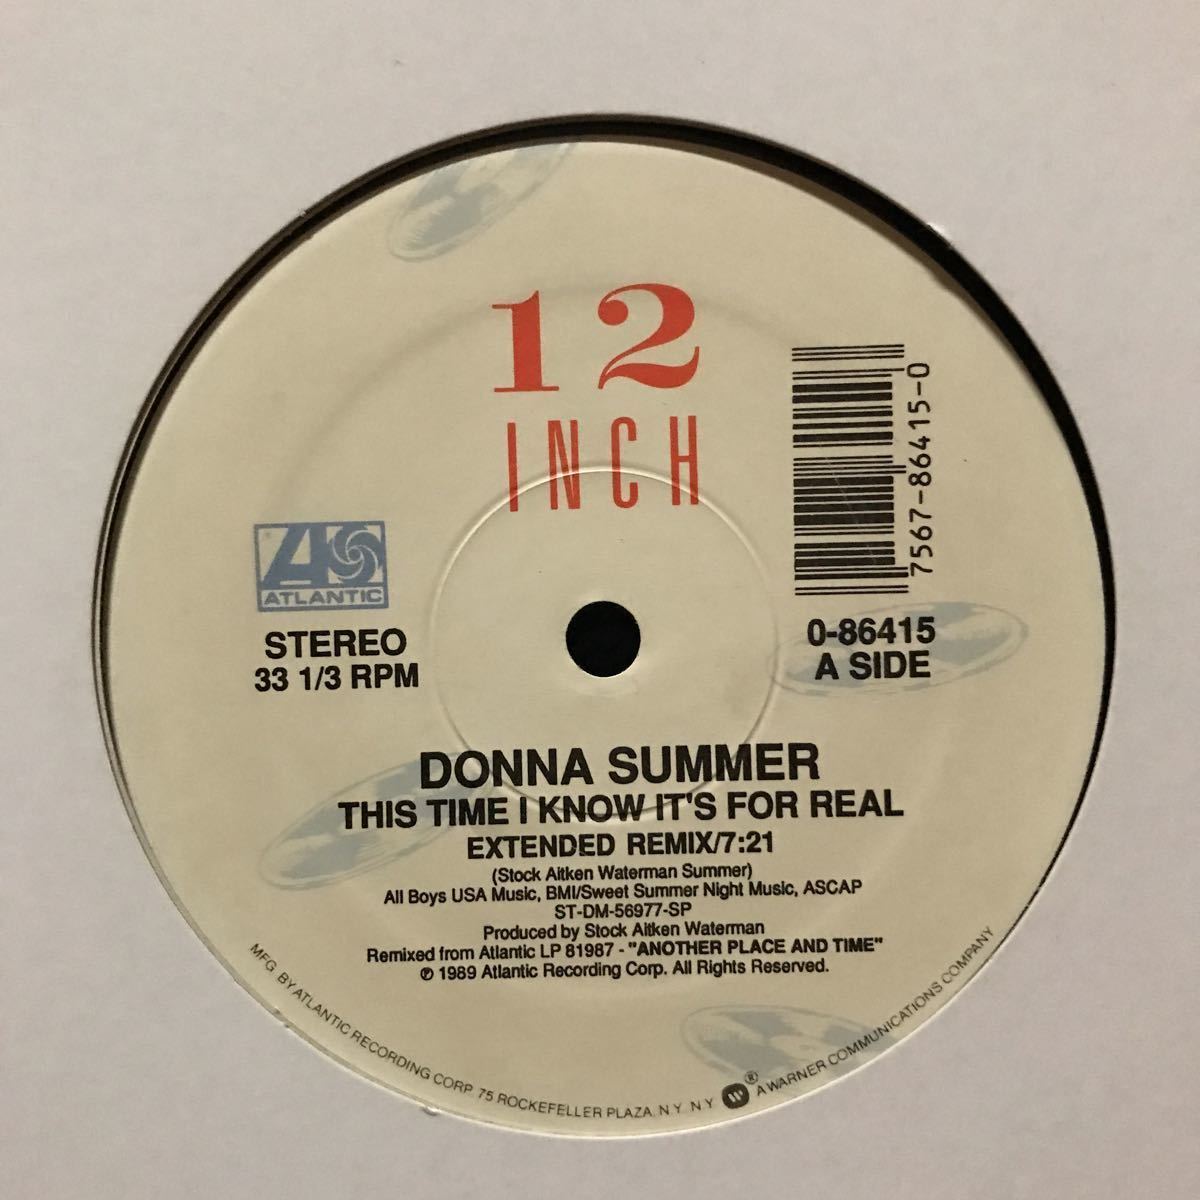 【r&b】Donna Summer / This Time I Know It's For Real［12inch］オリジナル盤《R40 9595》_画像4